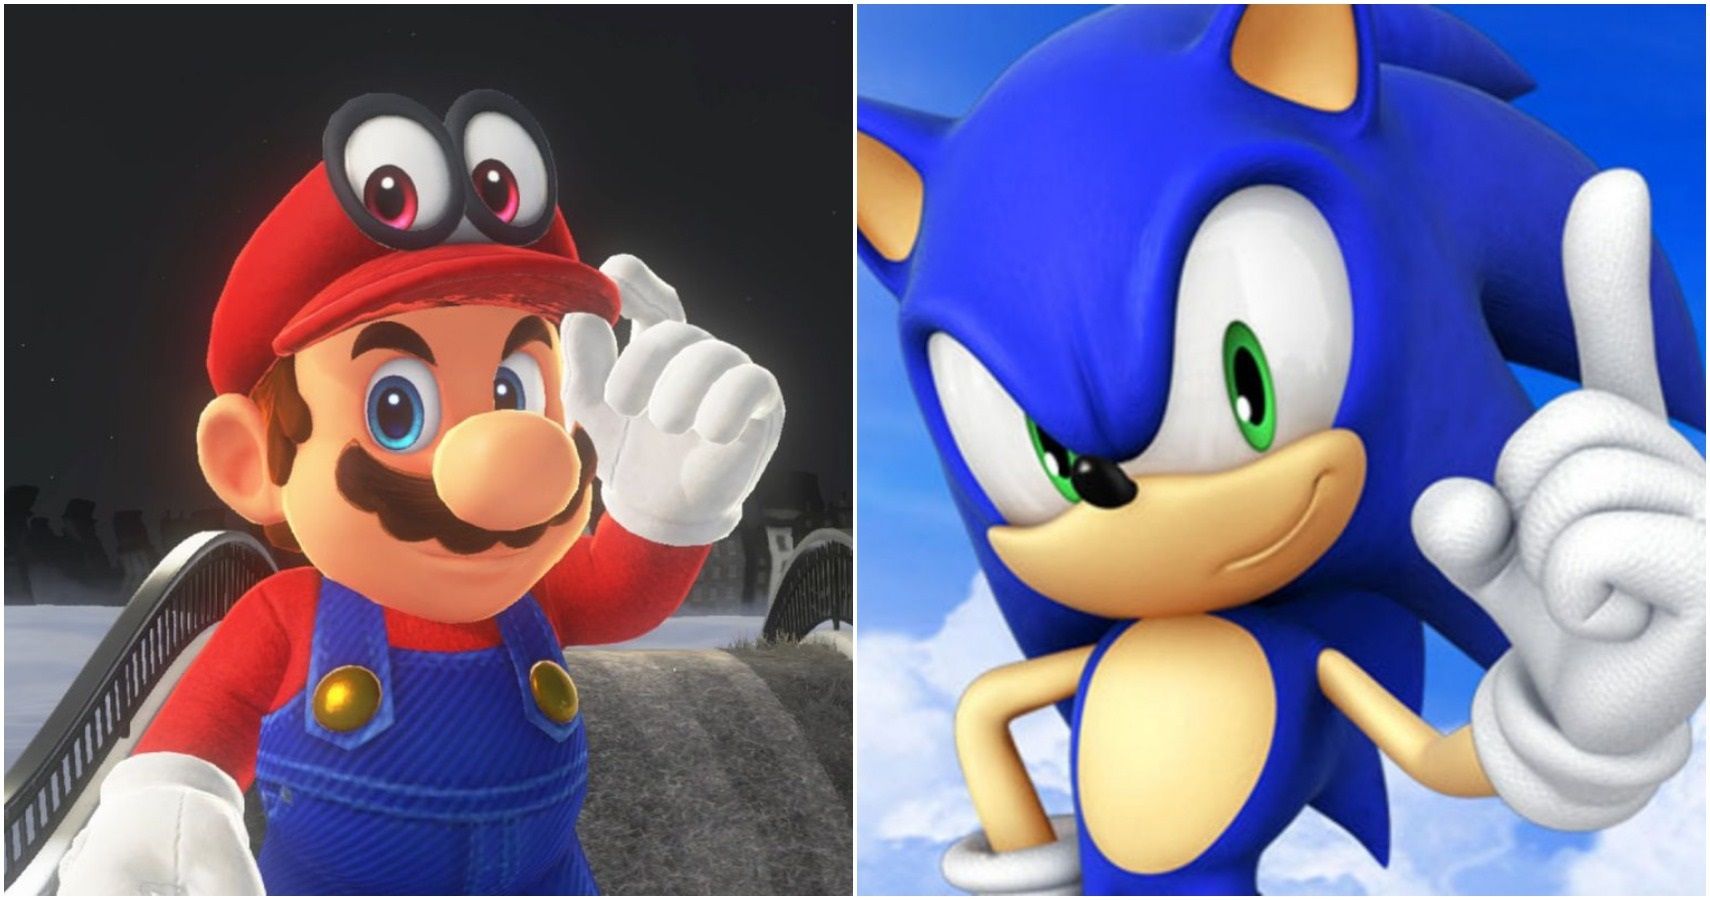 Sega Vs Nintendo 5 Reasons Why Mario Can Win Versus Sonic The Hedgehog In A Fight 5 He Would Lose